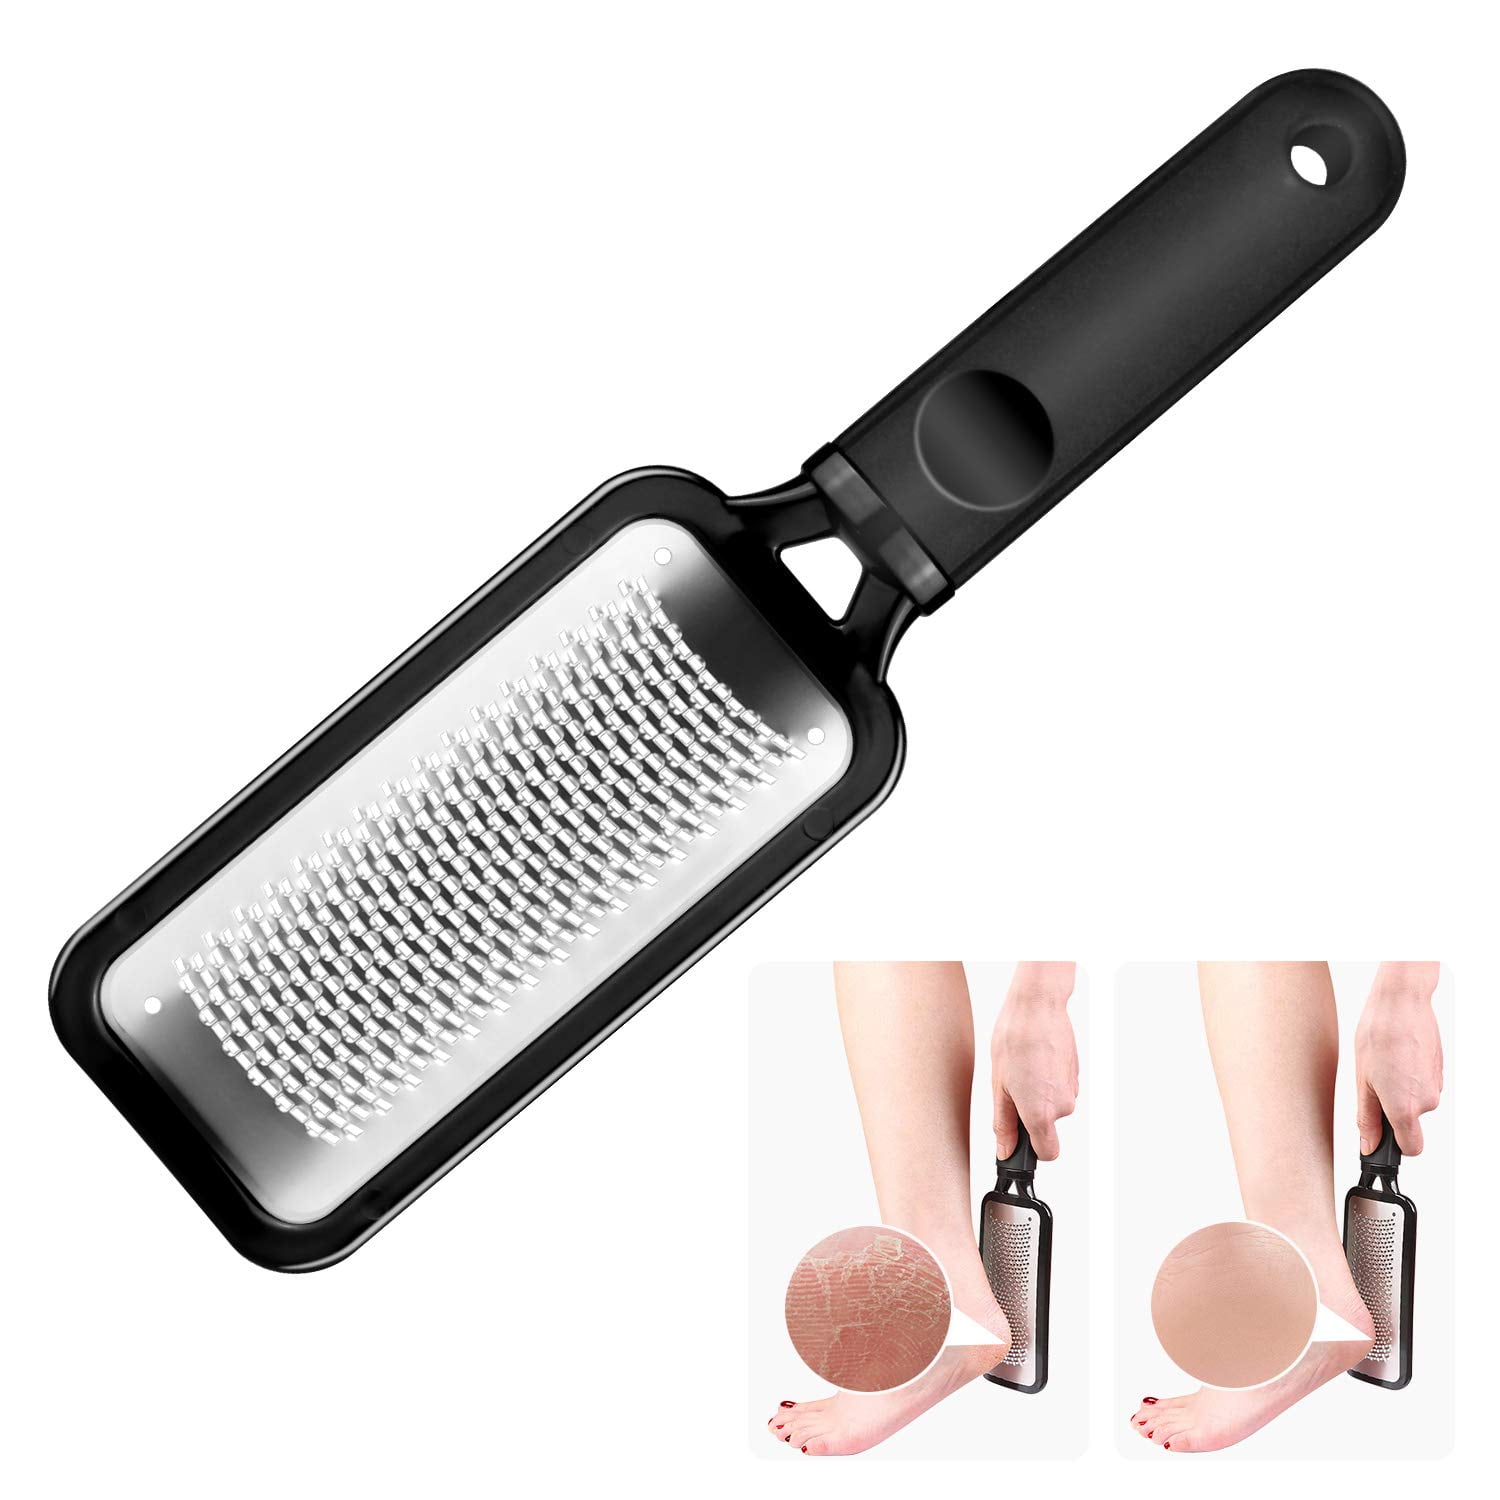 Colossal Foot Rasp Foot File, 2 Pcs Stainless Steel Pedicure Callus Remover  for Feet, Professional Foot Care Tools for Pedicure to Removes Hard Skin